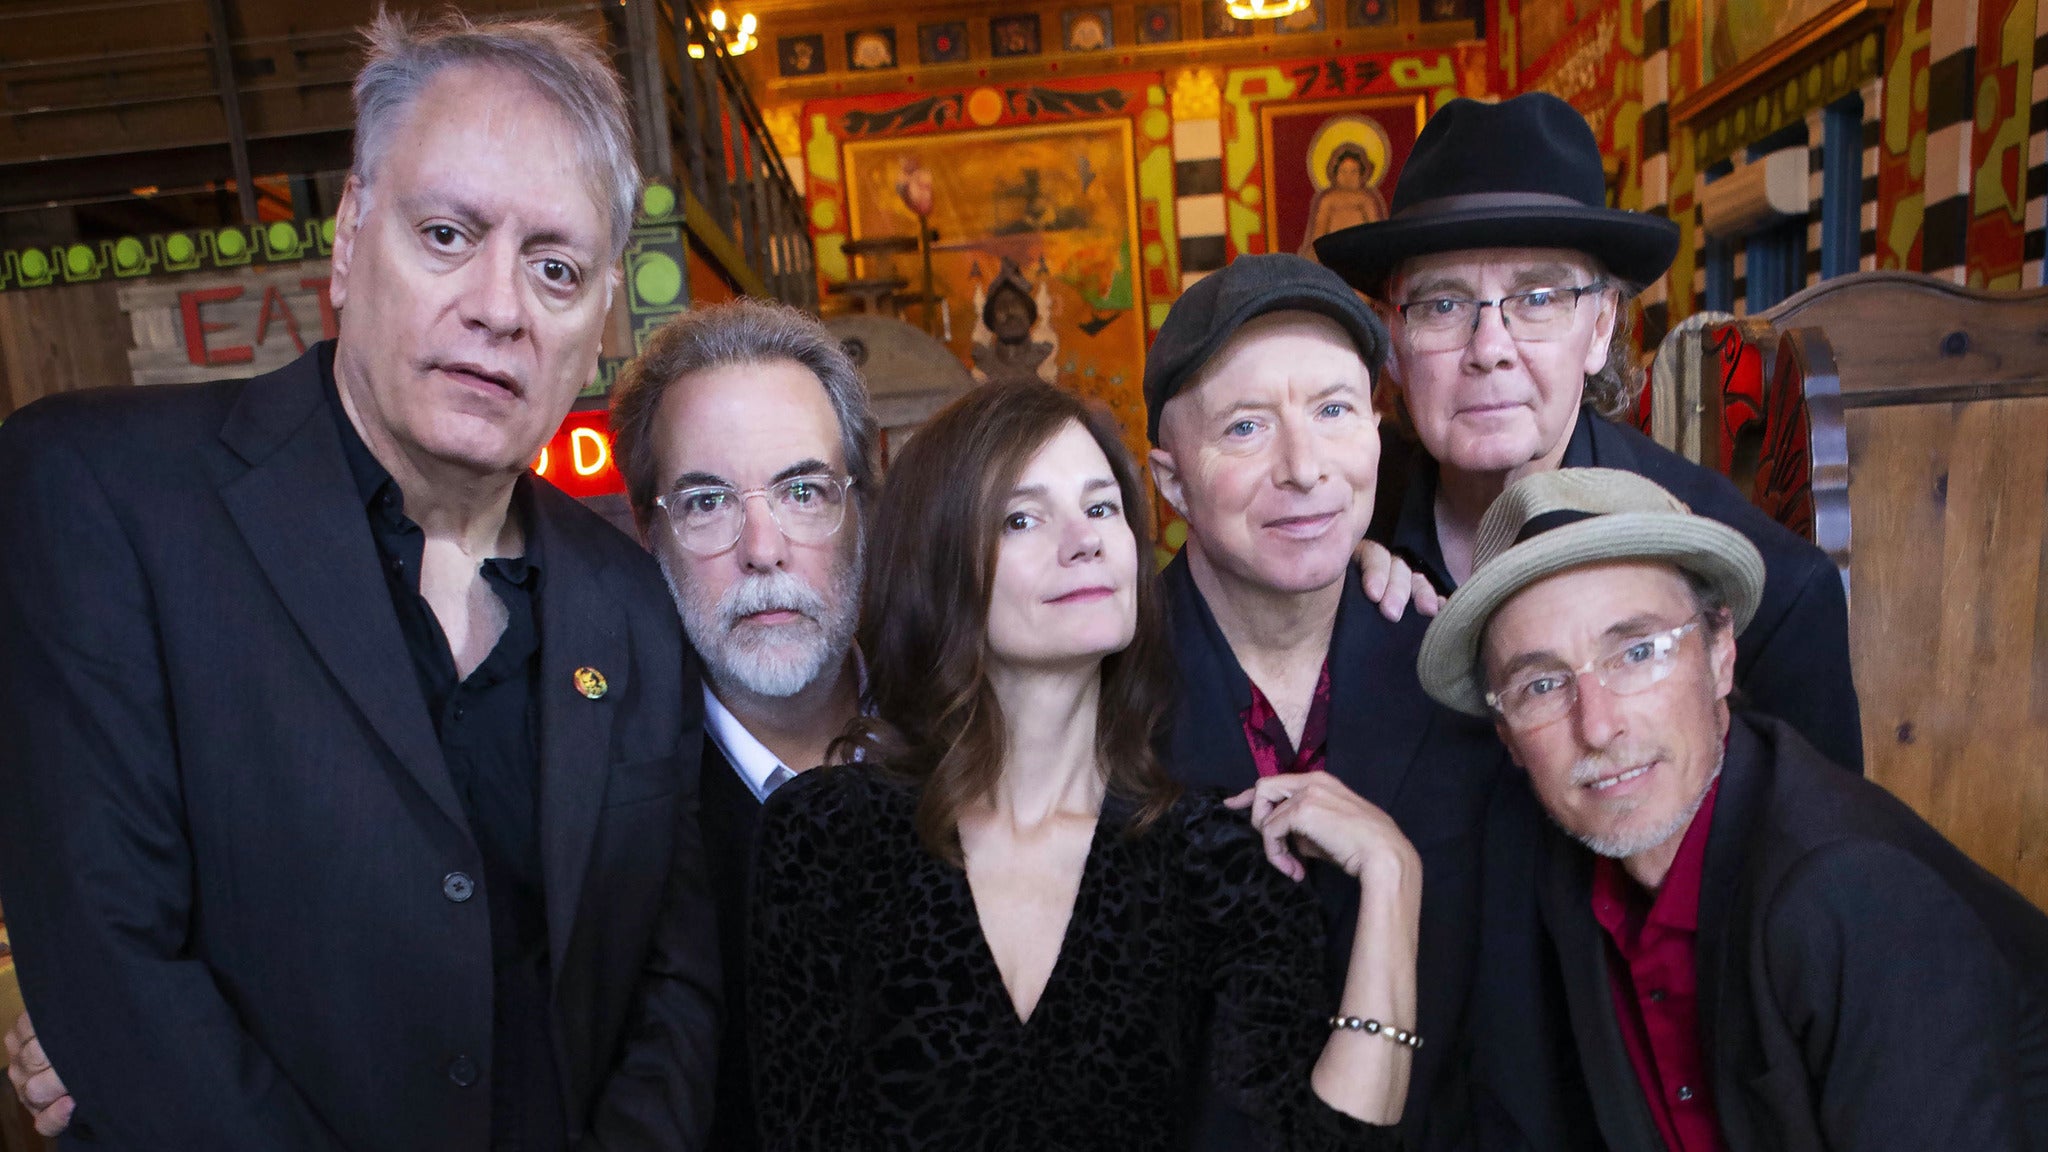 10000 Maniacs at Belly Up Tavern